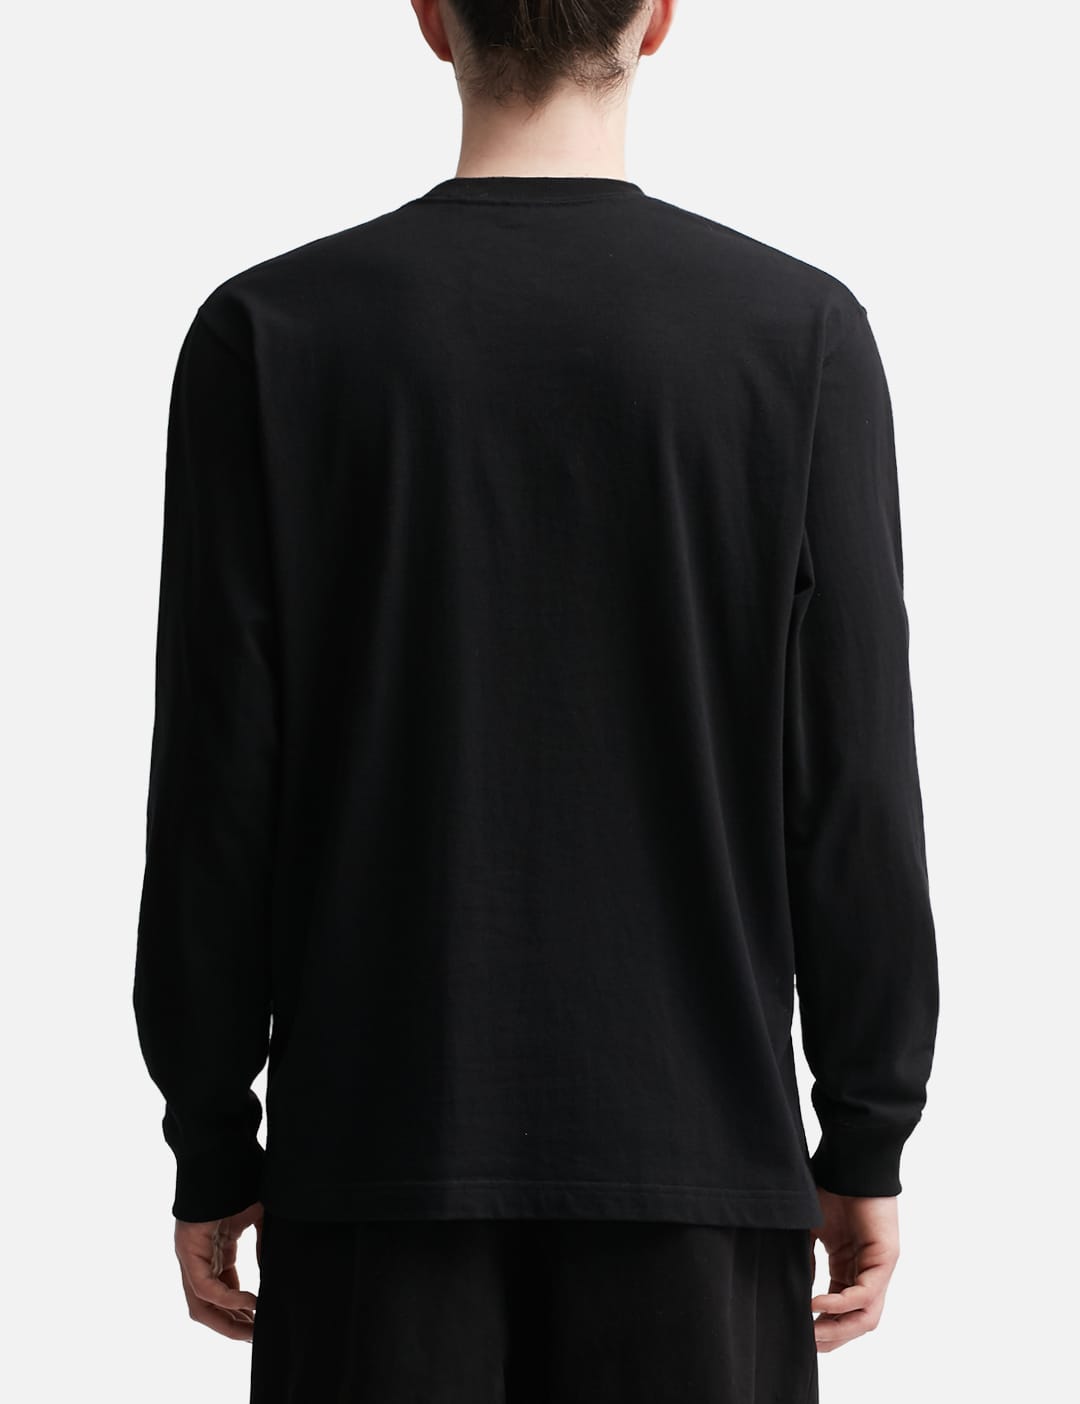 BlackEyePatch - OG LABEL L/S T-SHIRT | HBX - Globally Curated ...